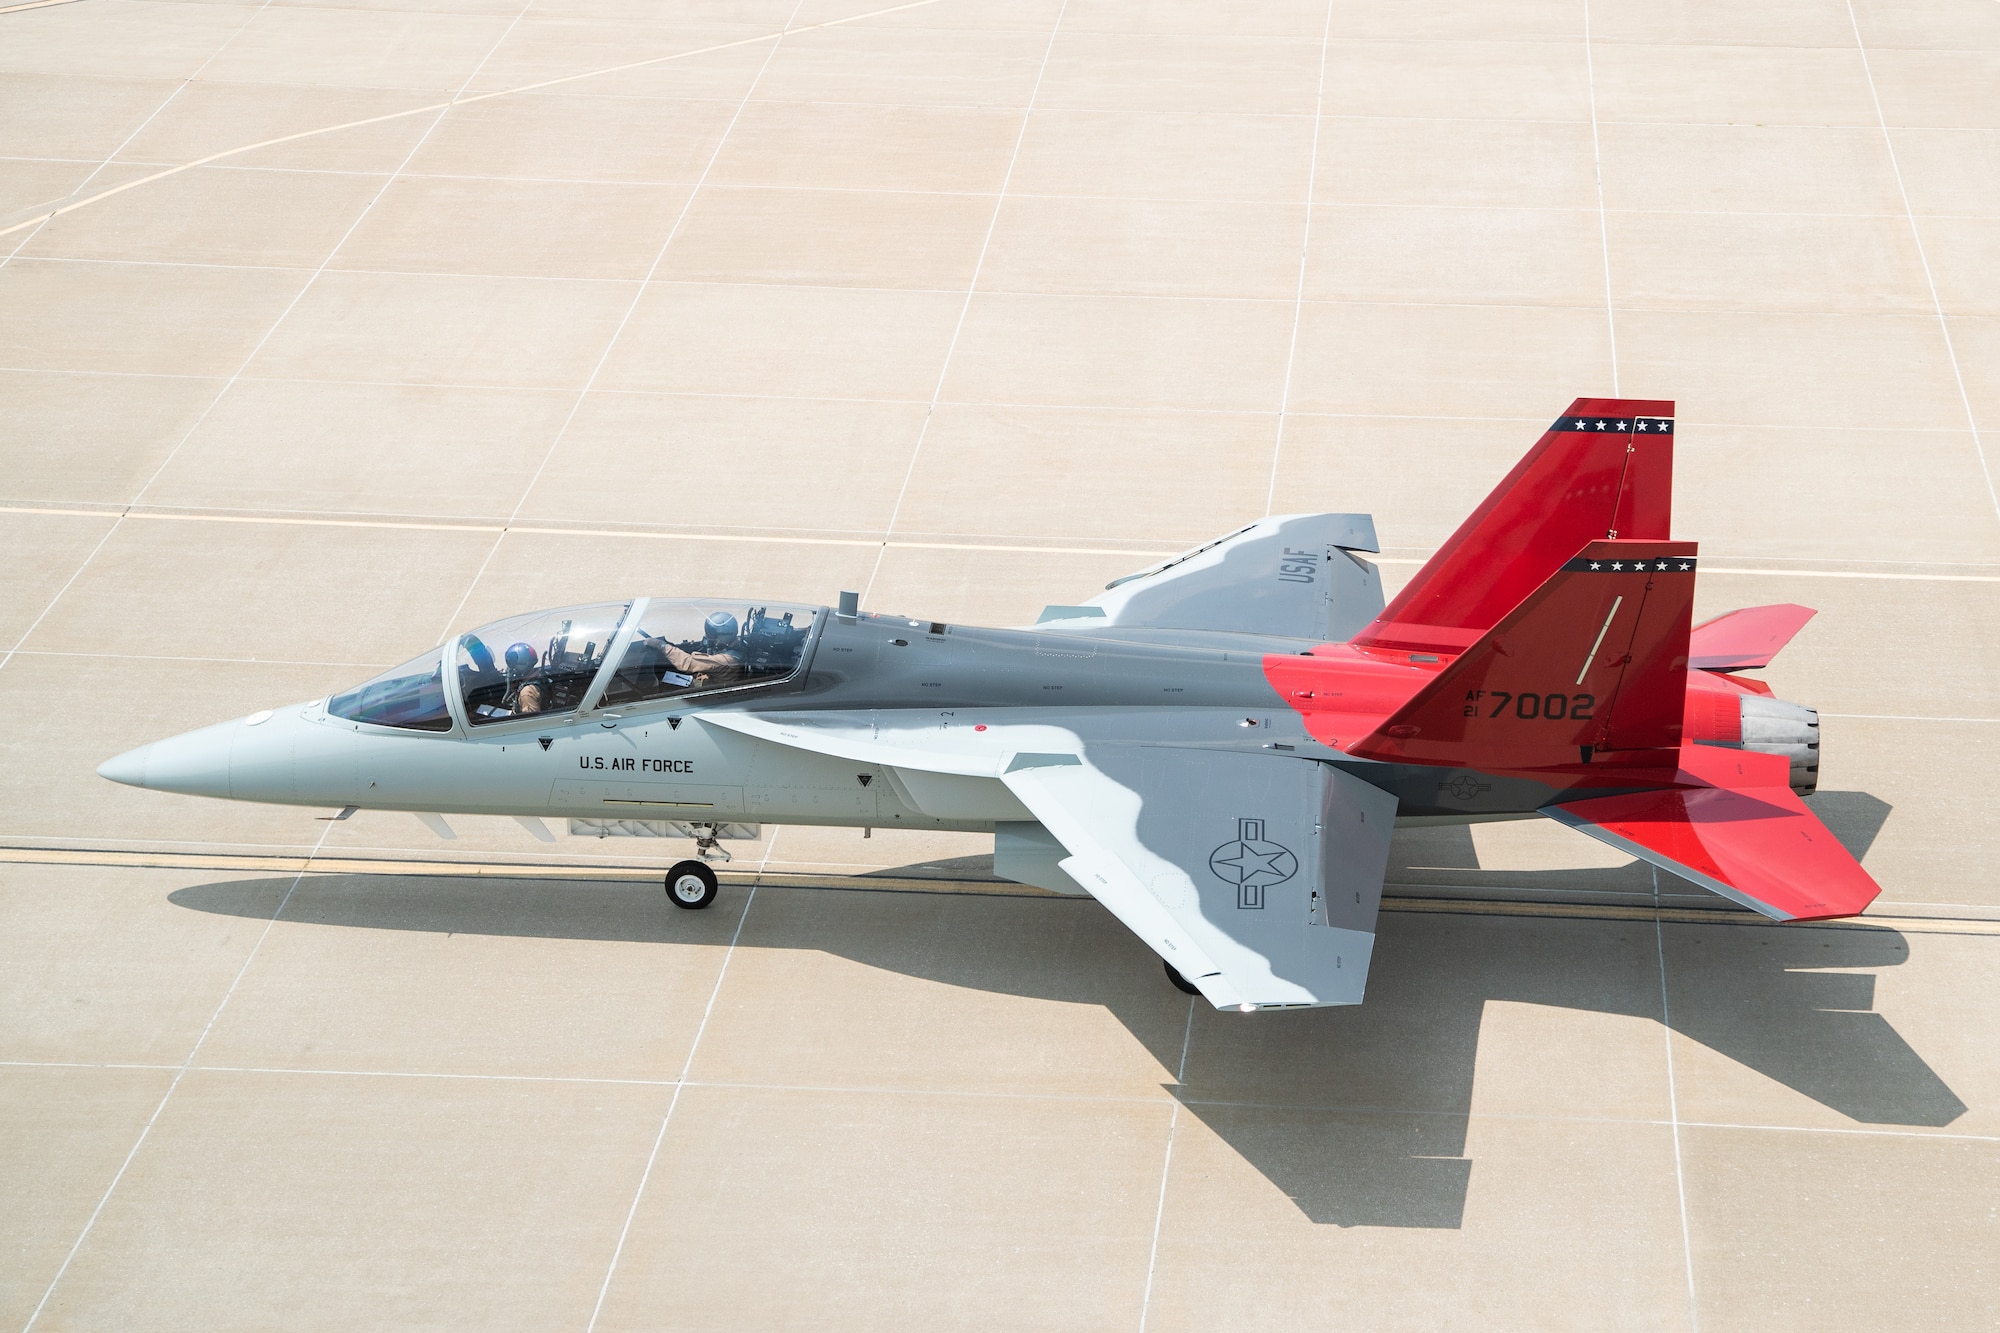 Boeing test pilots conduct taxi tests of the T-7A Red Hawk at the Boeing aircraft delivery center in St. Louis, Missouri, June 22. Turner became the first Air Force pilot to fly the T-7A Red Hawk, following a test flight at the Boeing aircraft delivery center in St. Louis, Missouri, June 28.